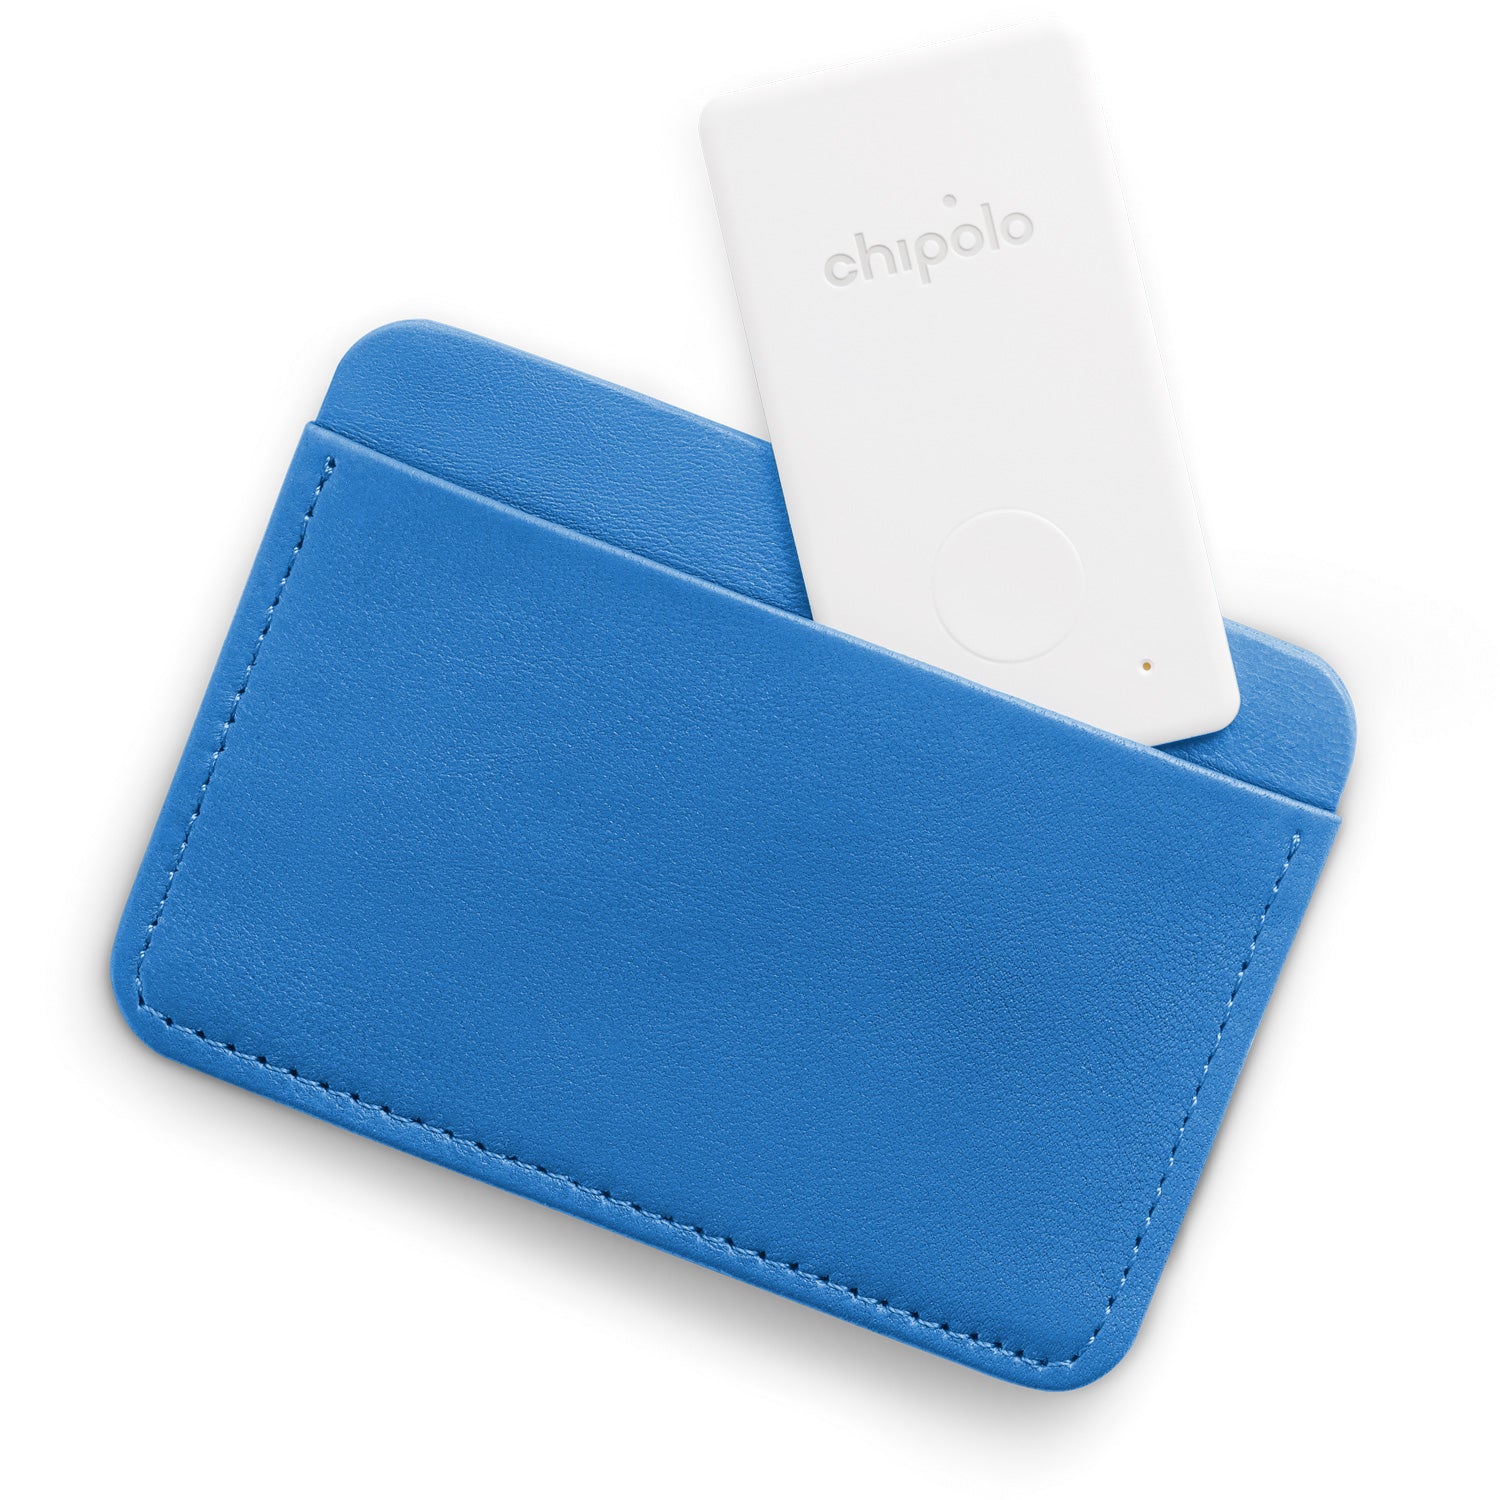 Chipolo - White 'Chipolo Card' Bluetooth Item Finder